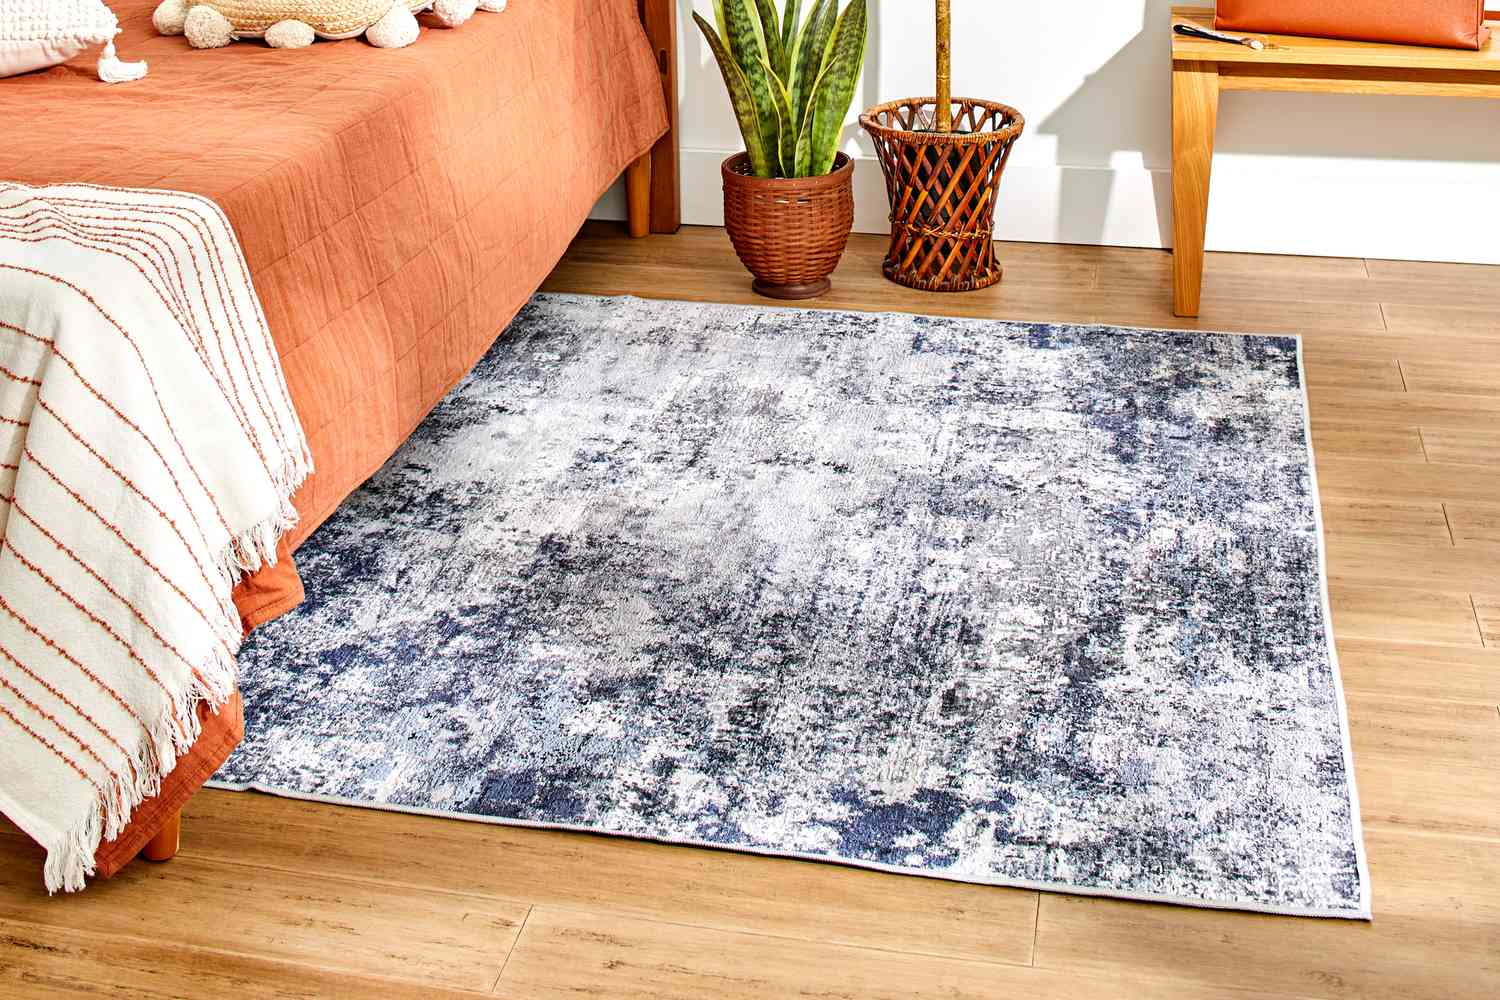 The Better Homes & Gardens Abstract Machine Washable Area Rug in a bedroom setting